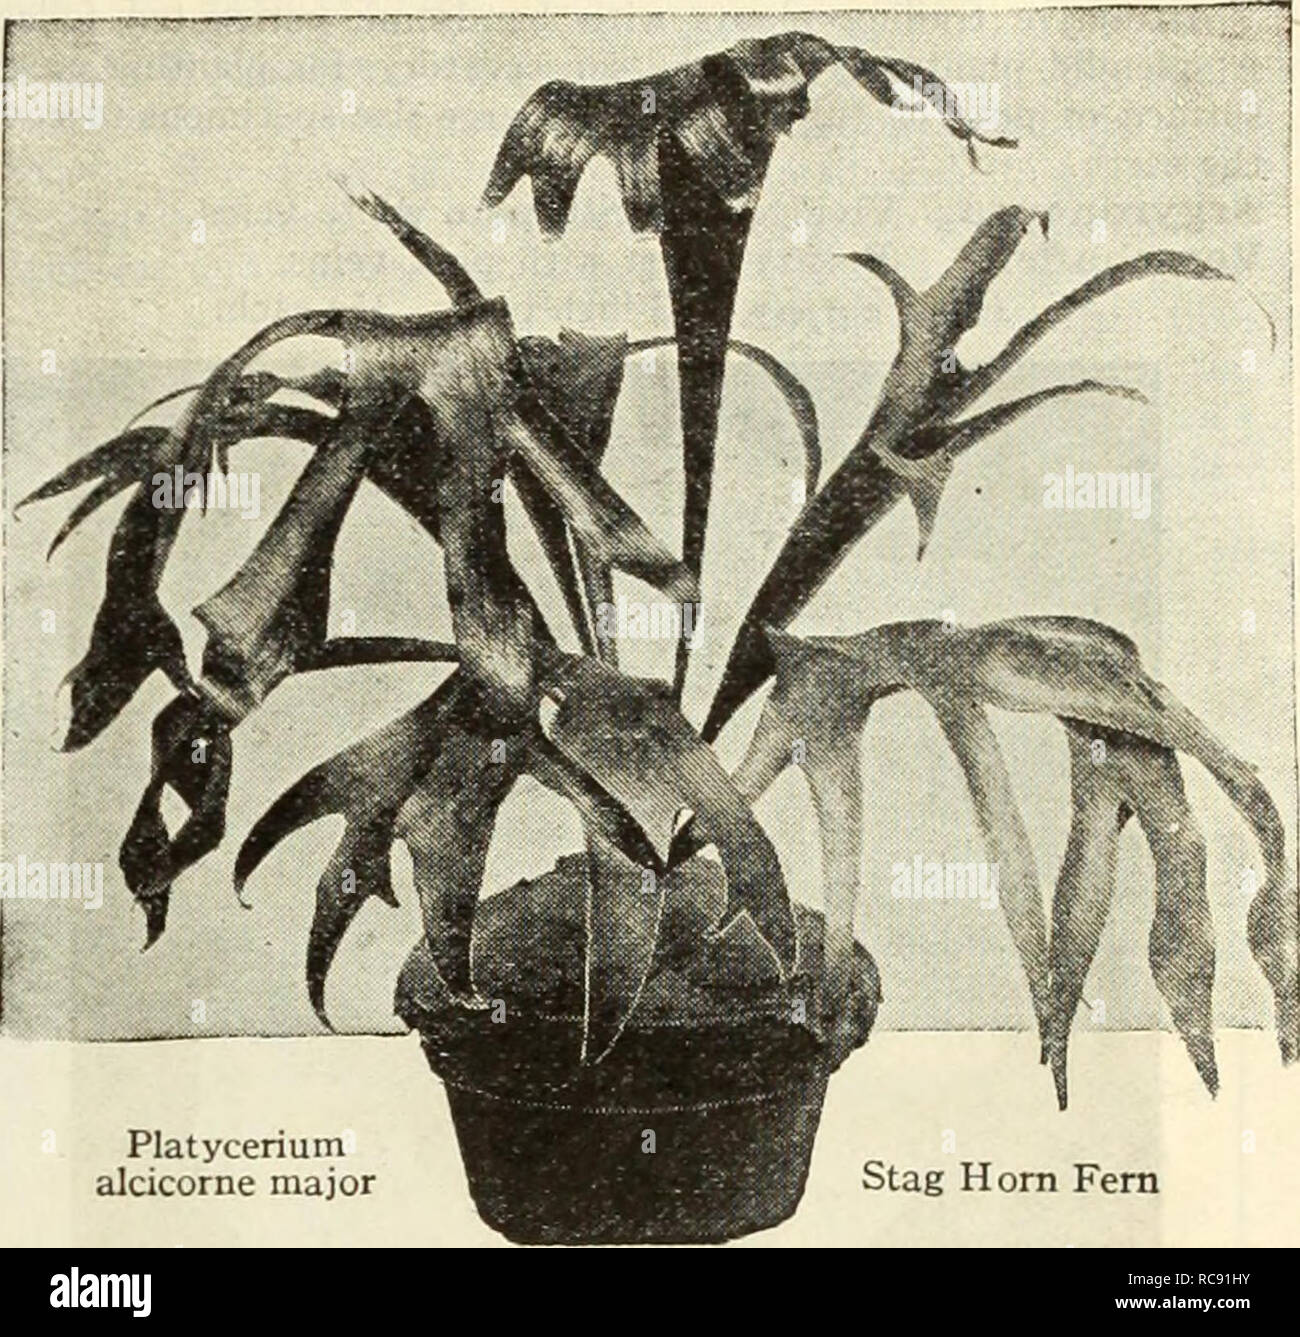 . Dreer's autumn catalog of bulbs : plants, shrubs, and seeds for fall planting. Flowers Seeds Catalogs; Bulbs (Plants) Seeds Catalogs; Nurseries (Horticulture) Catalogs; Gardening Equipment and supplies Catalogs. Cibotium Schiedei Cibotium Schiedei {Mexican Tree Fern). One of the most desirable and most valuable of all Ferns for room decoration. Beautiful hght green foliage. 4-inch pots $1.00; 6-inch pots $2.50; 8-inch tubs $5.00; 10-inch tubs $7.50 each. Cyrtomium Rochfordianum compactum {Crested Holly Fern). Ne.xt to the Boston Ferns the Holly Fern is the most satisfactory for home and apar Stock Photo